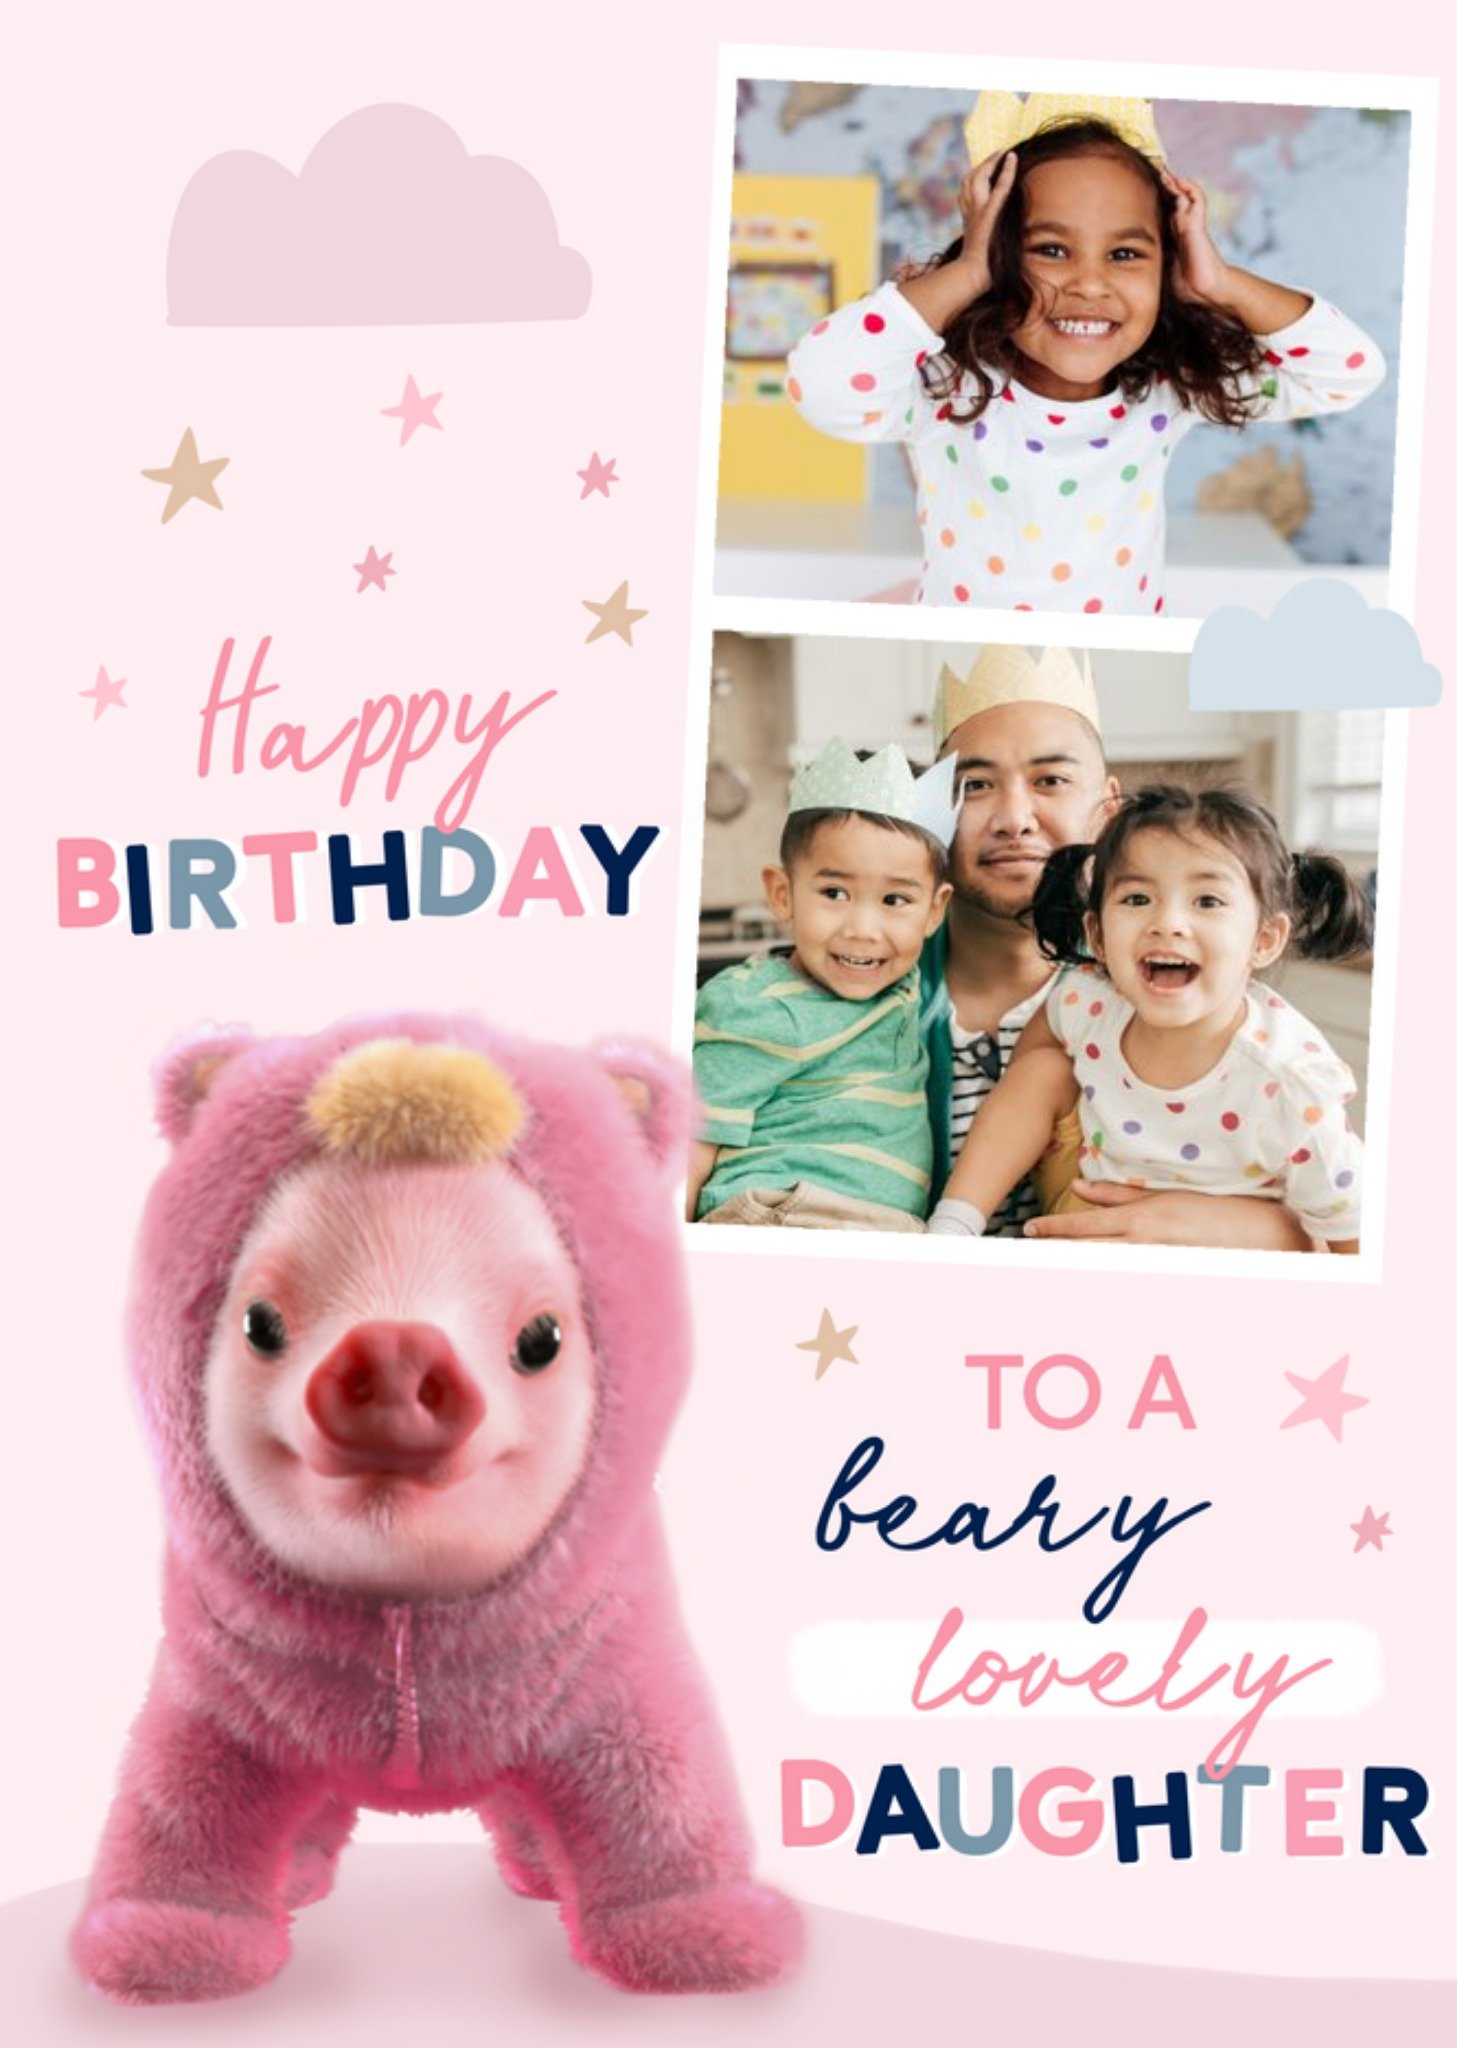 Moonpig Exclusive Moonpigs Cuddly Teddy Bear Pig Daughter Photo Upload Birthday Card, Large